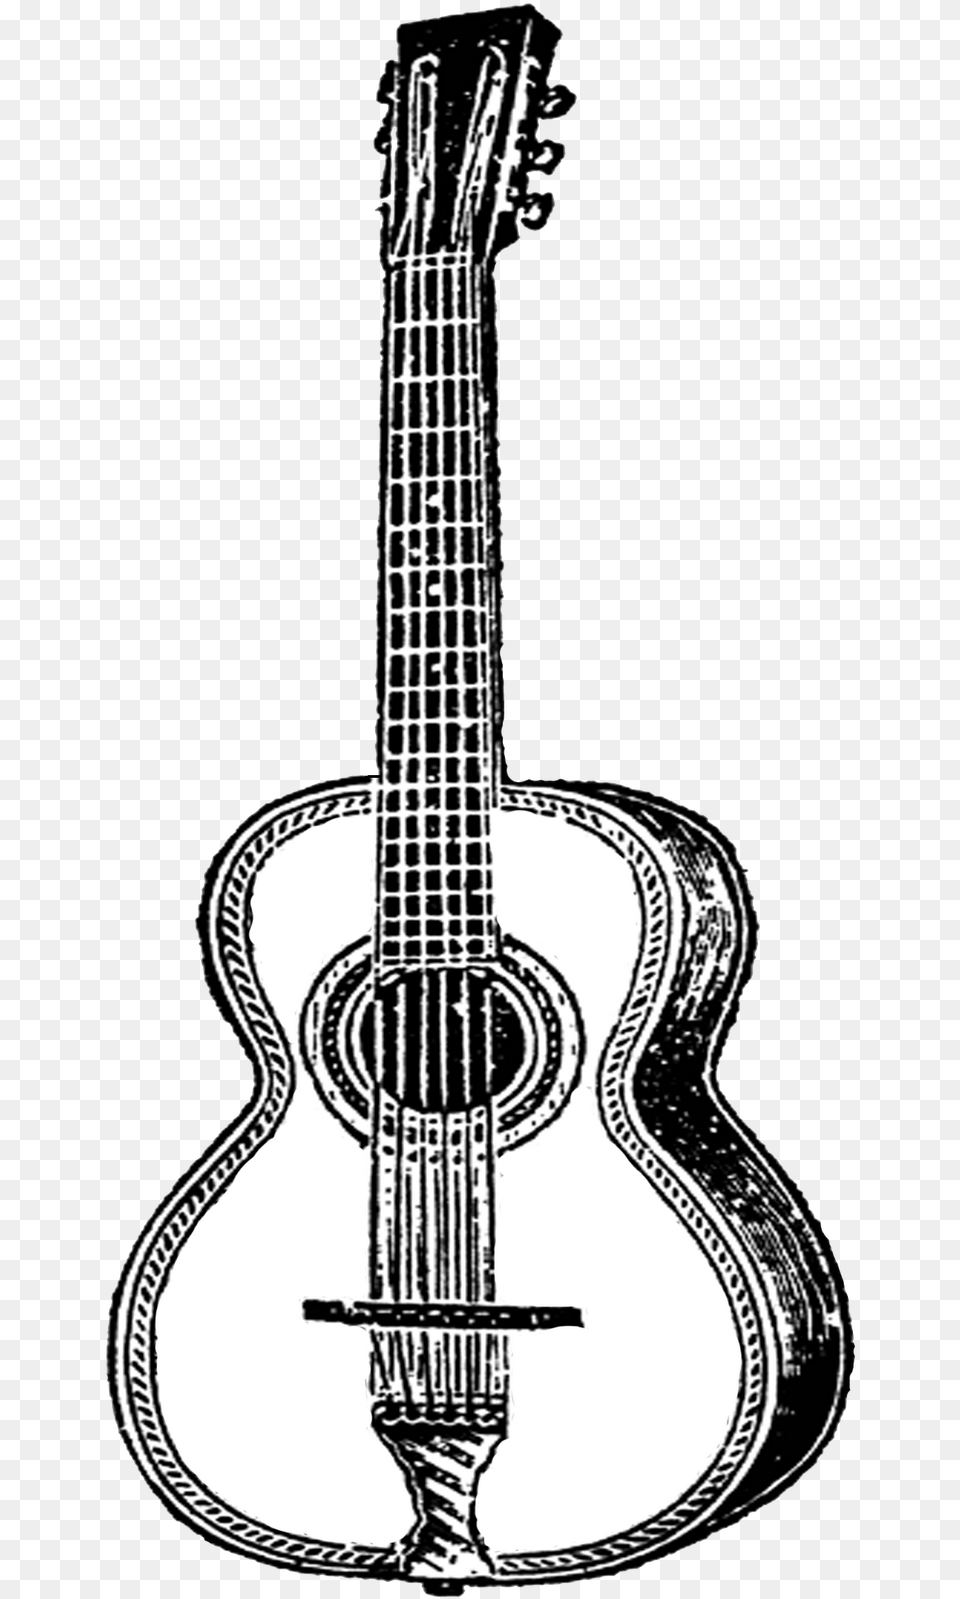 Transparent Guitar Clip Art Black And White Guitar With Transparent Background, Musical Instrument Free Png Download